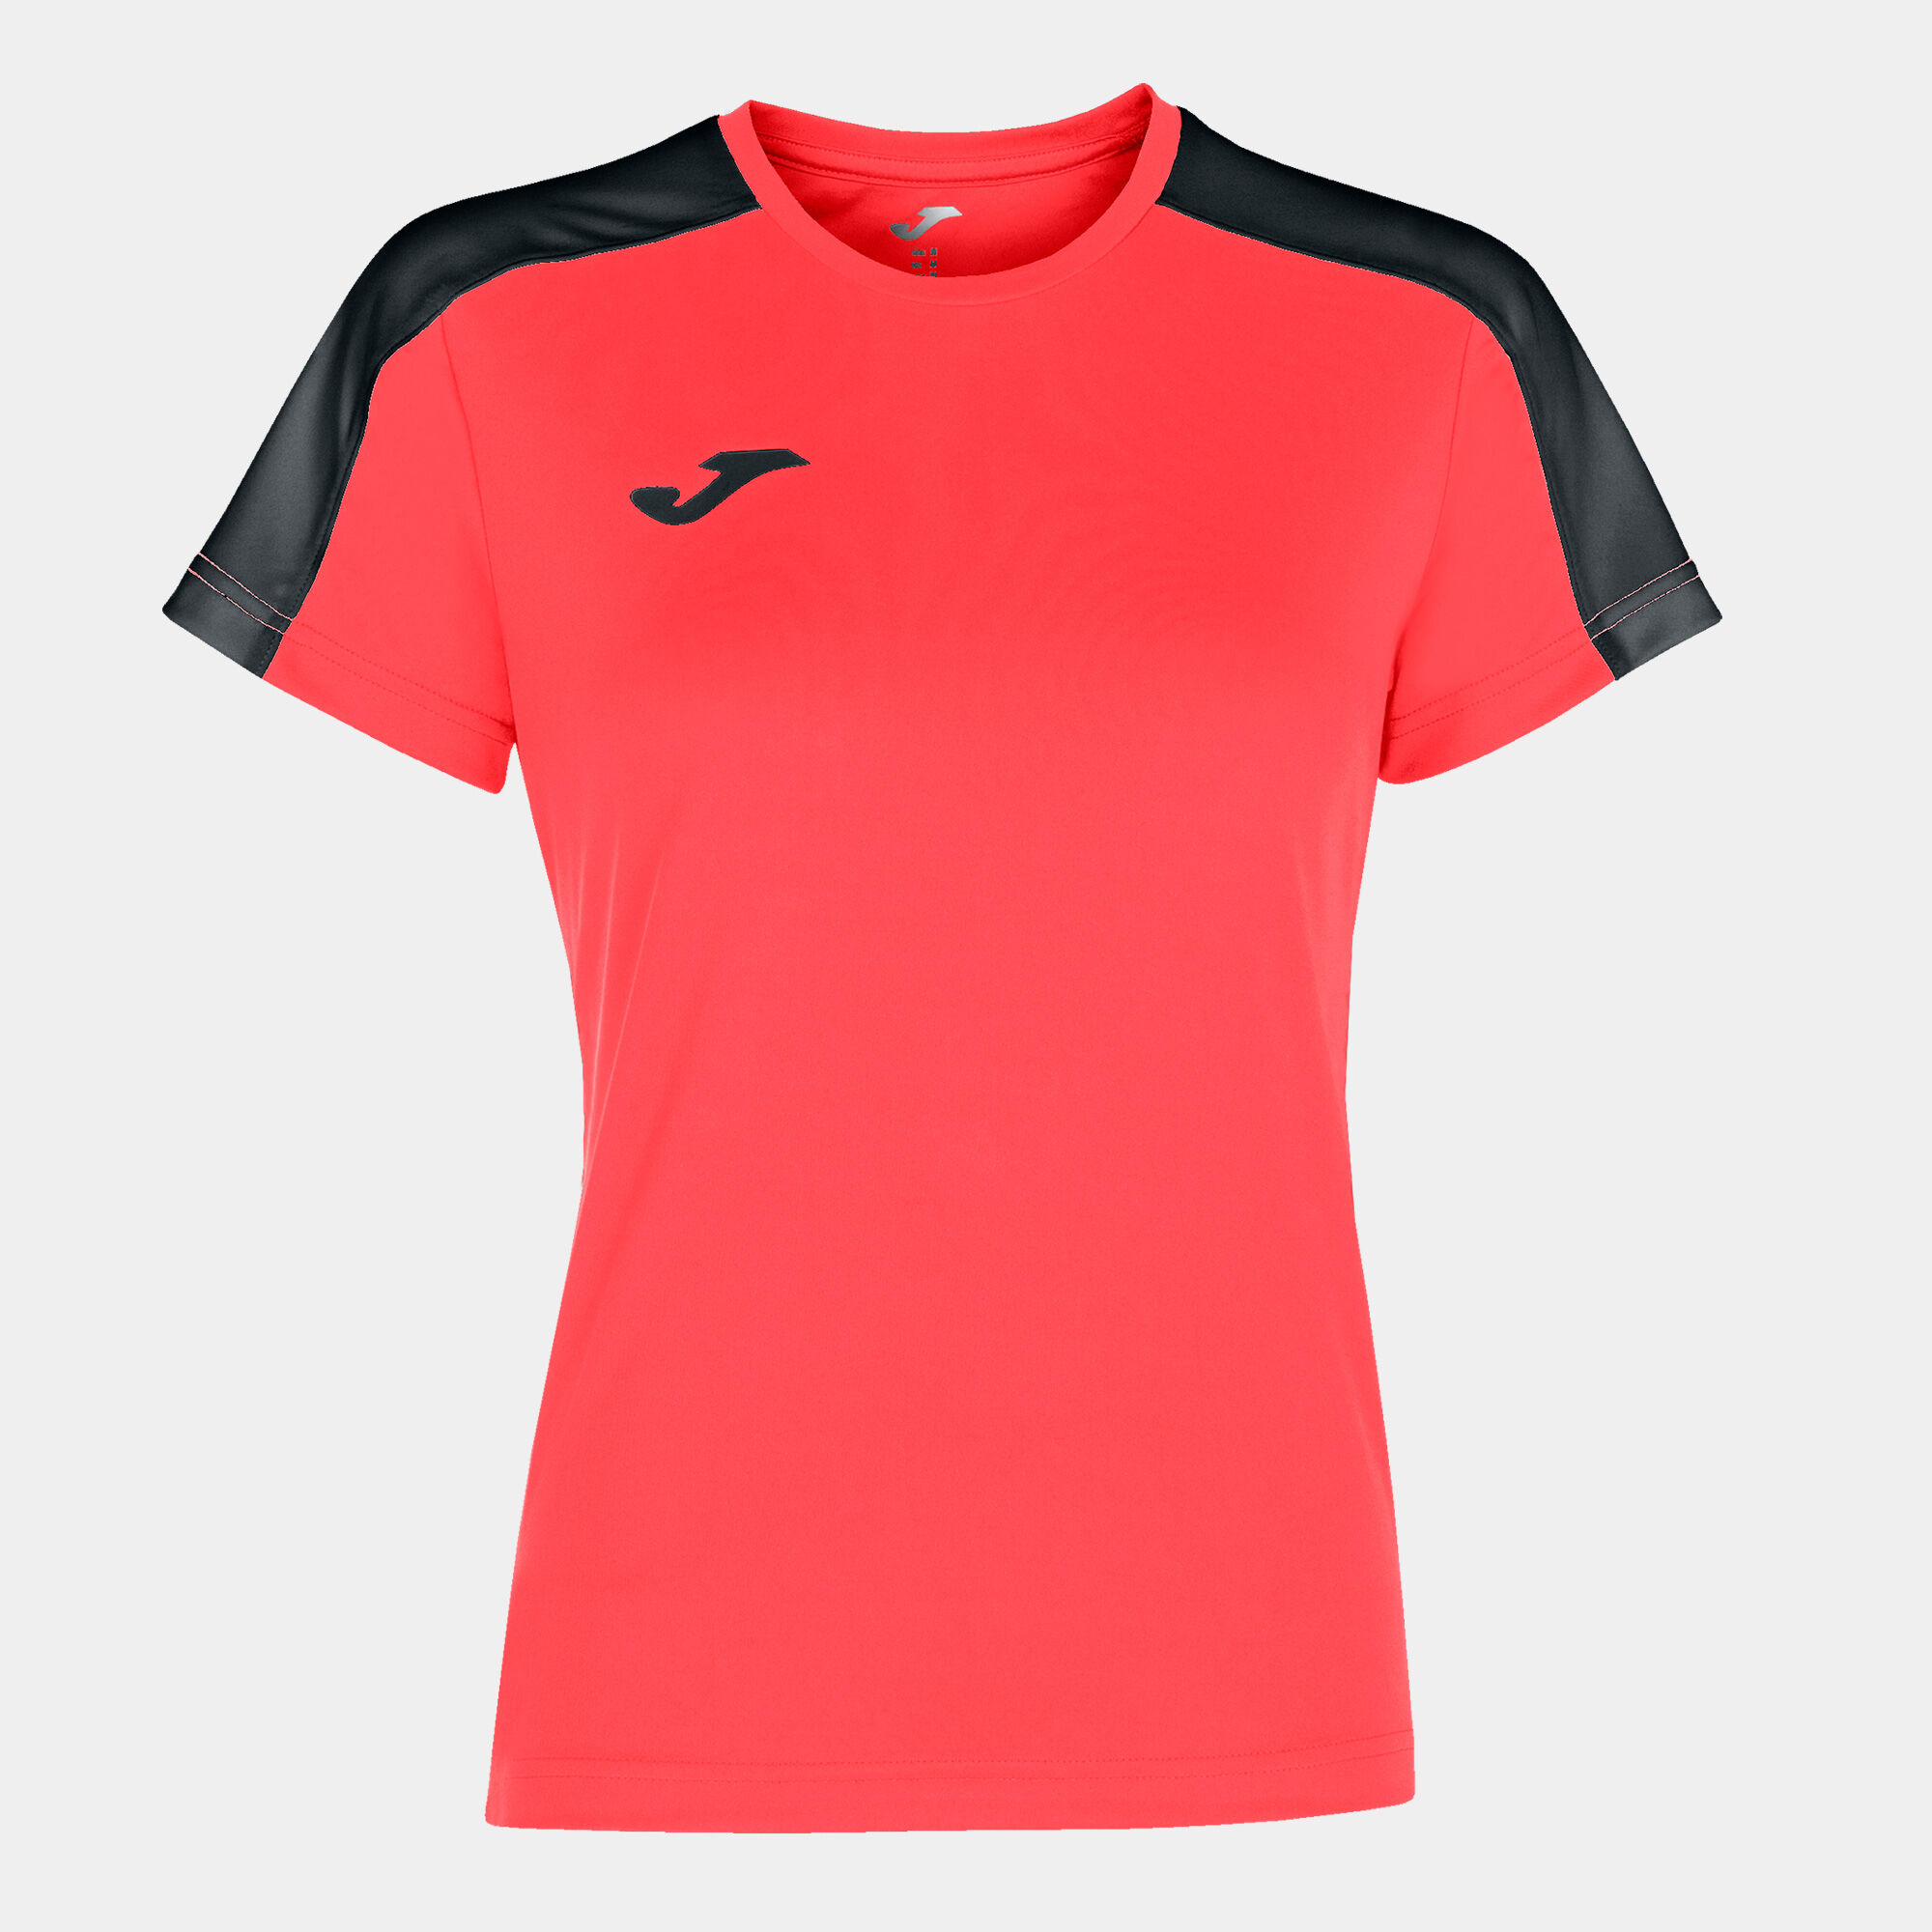 MAILLOT MANCHES COURTES FEMME ACADEMY III CORAIL FLUO NOIR